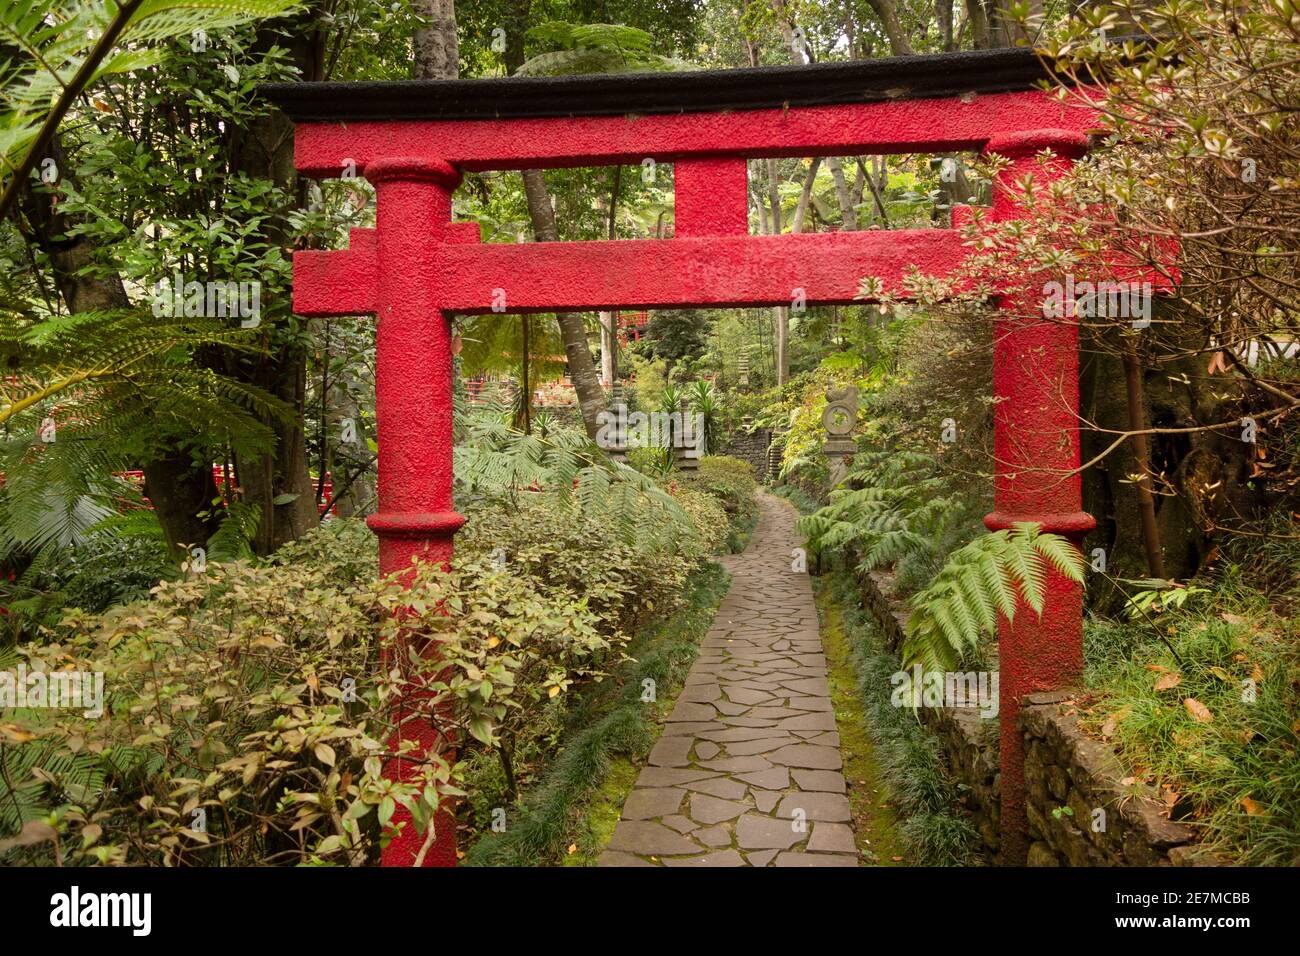 Red Oriental arch leading down a crazy paving path in the Northern Oriental Garden at Monte Palace Tropical Garden Stock Photo